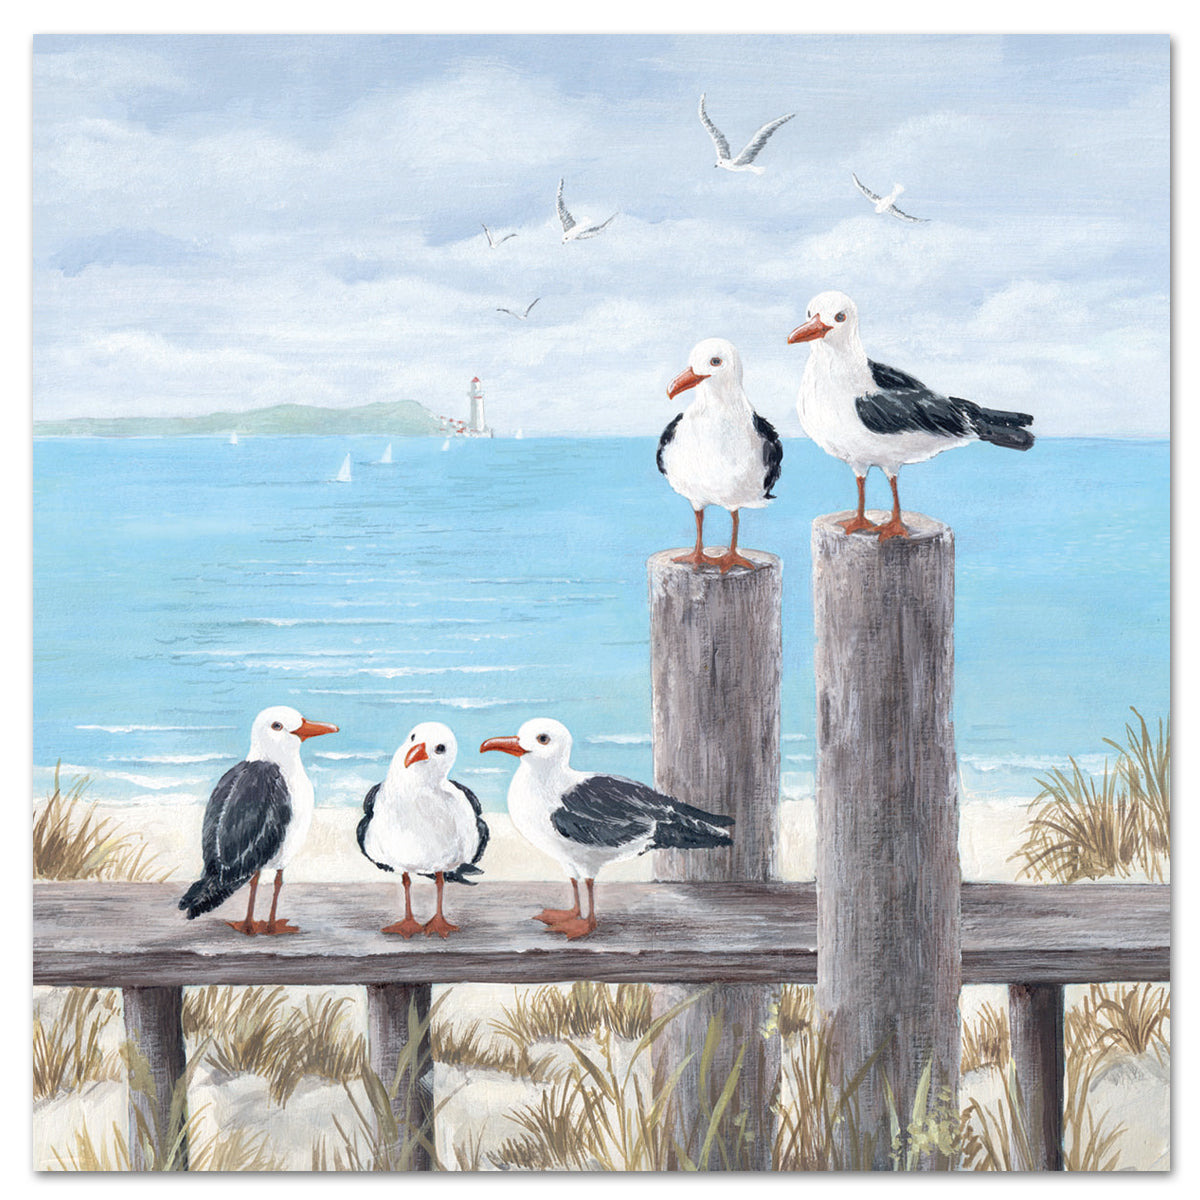 Seagulls on Dock Paper Luncheon Napkins